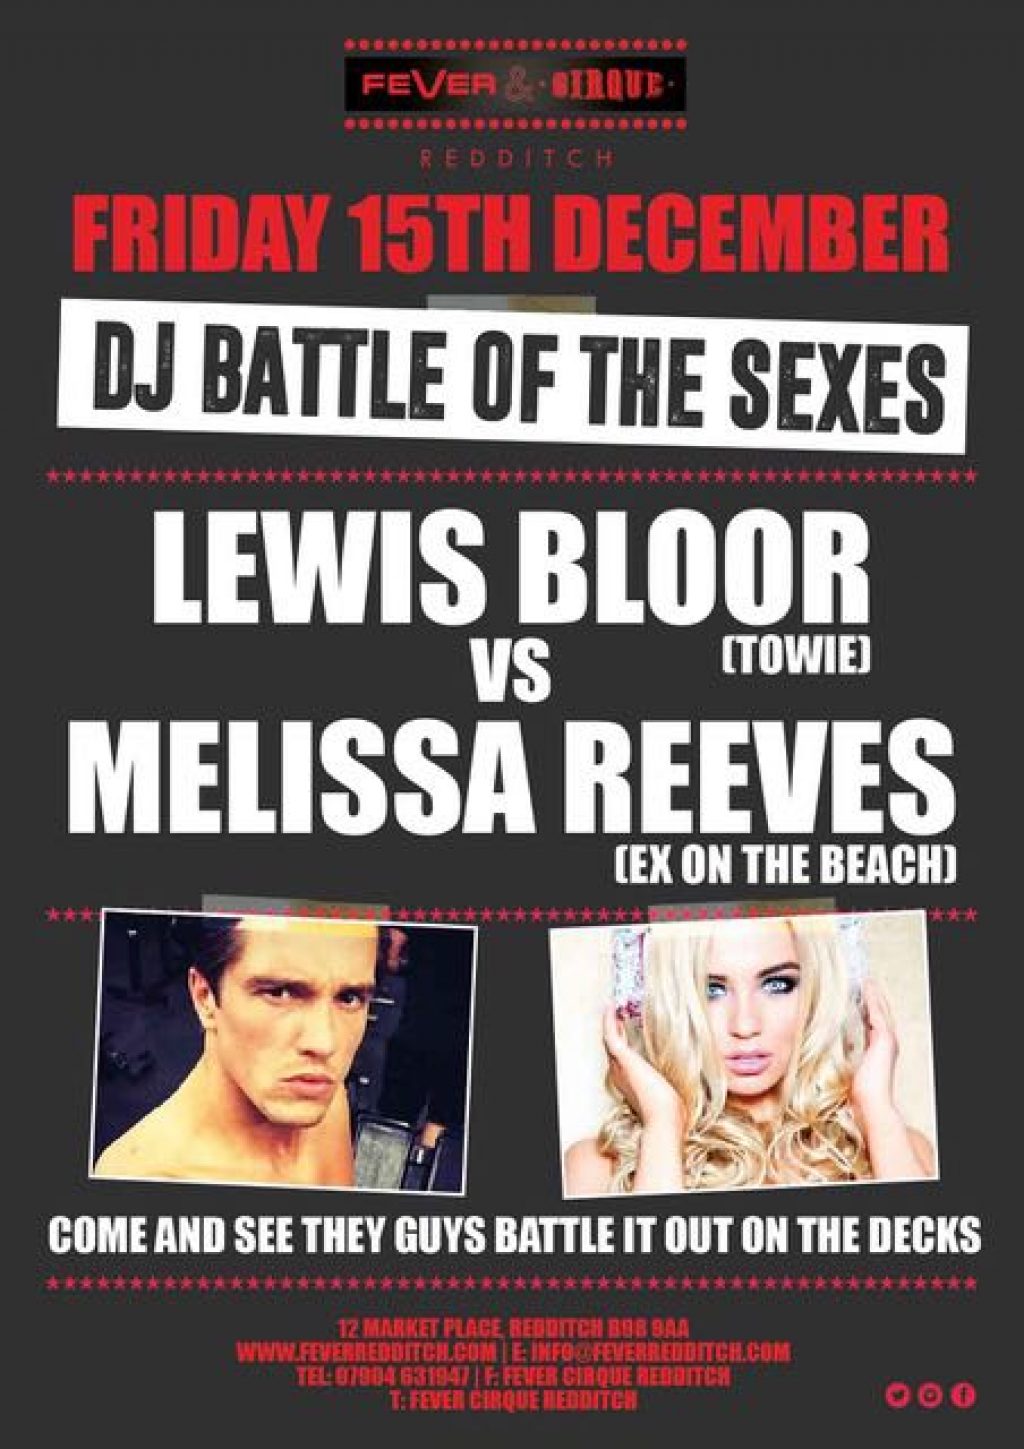 Battle of the Sexes at Fever, Redditch